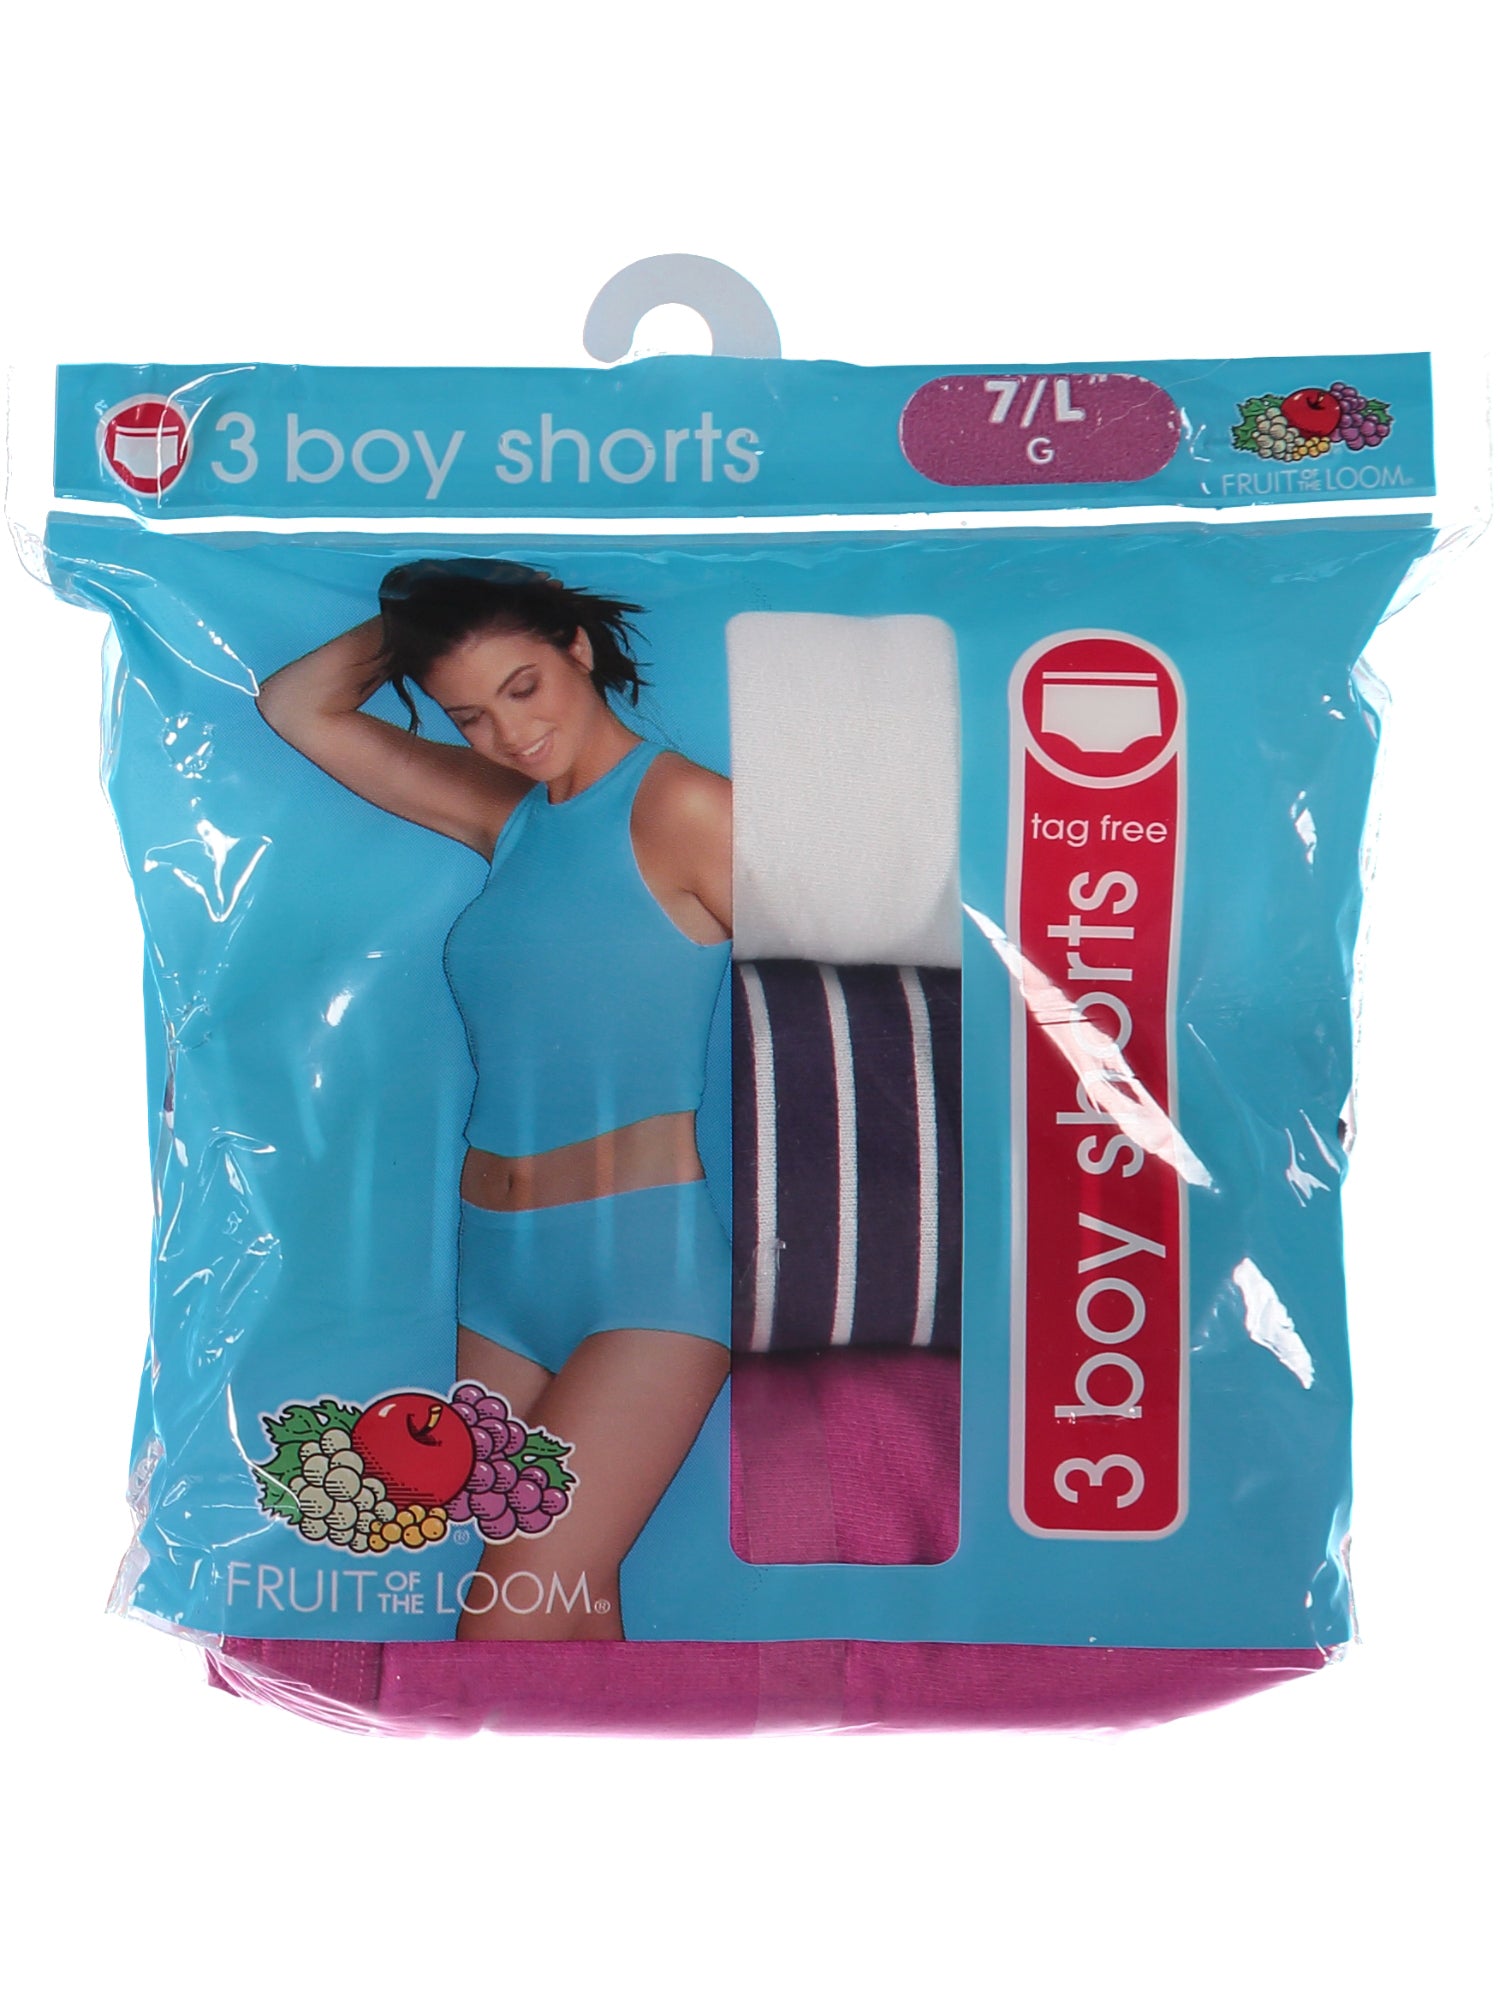 Fruit of the Loom Womens 3-Pack Boy Shorts